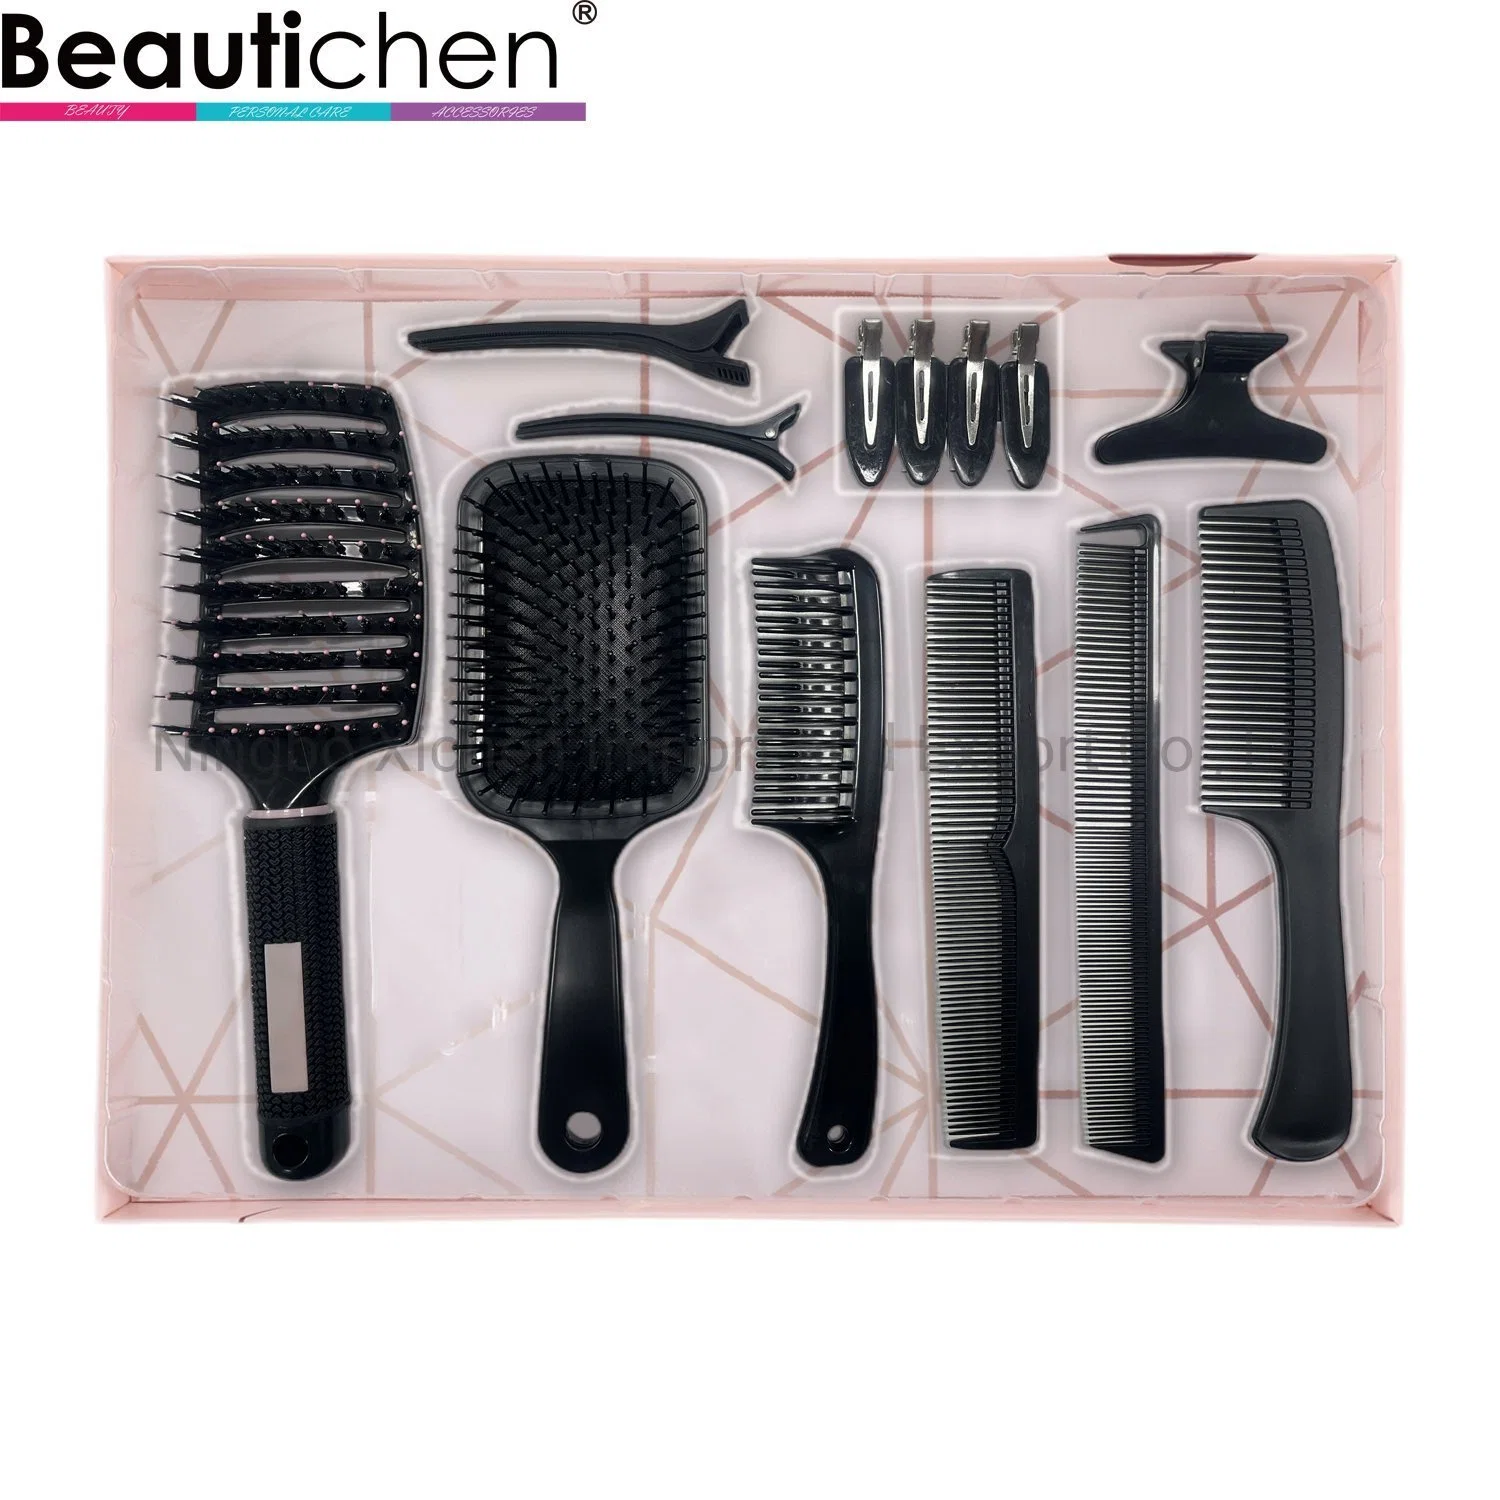 Beautichen Black Gift Set with Hair Brushes, Combs and Hair Clips 10 in 1 Novelty Hair Brush Set